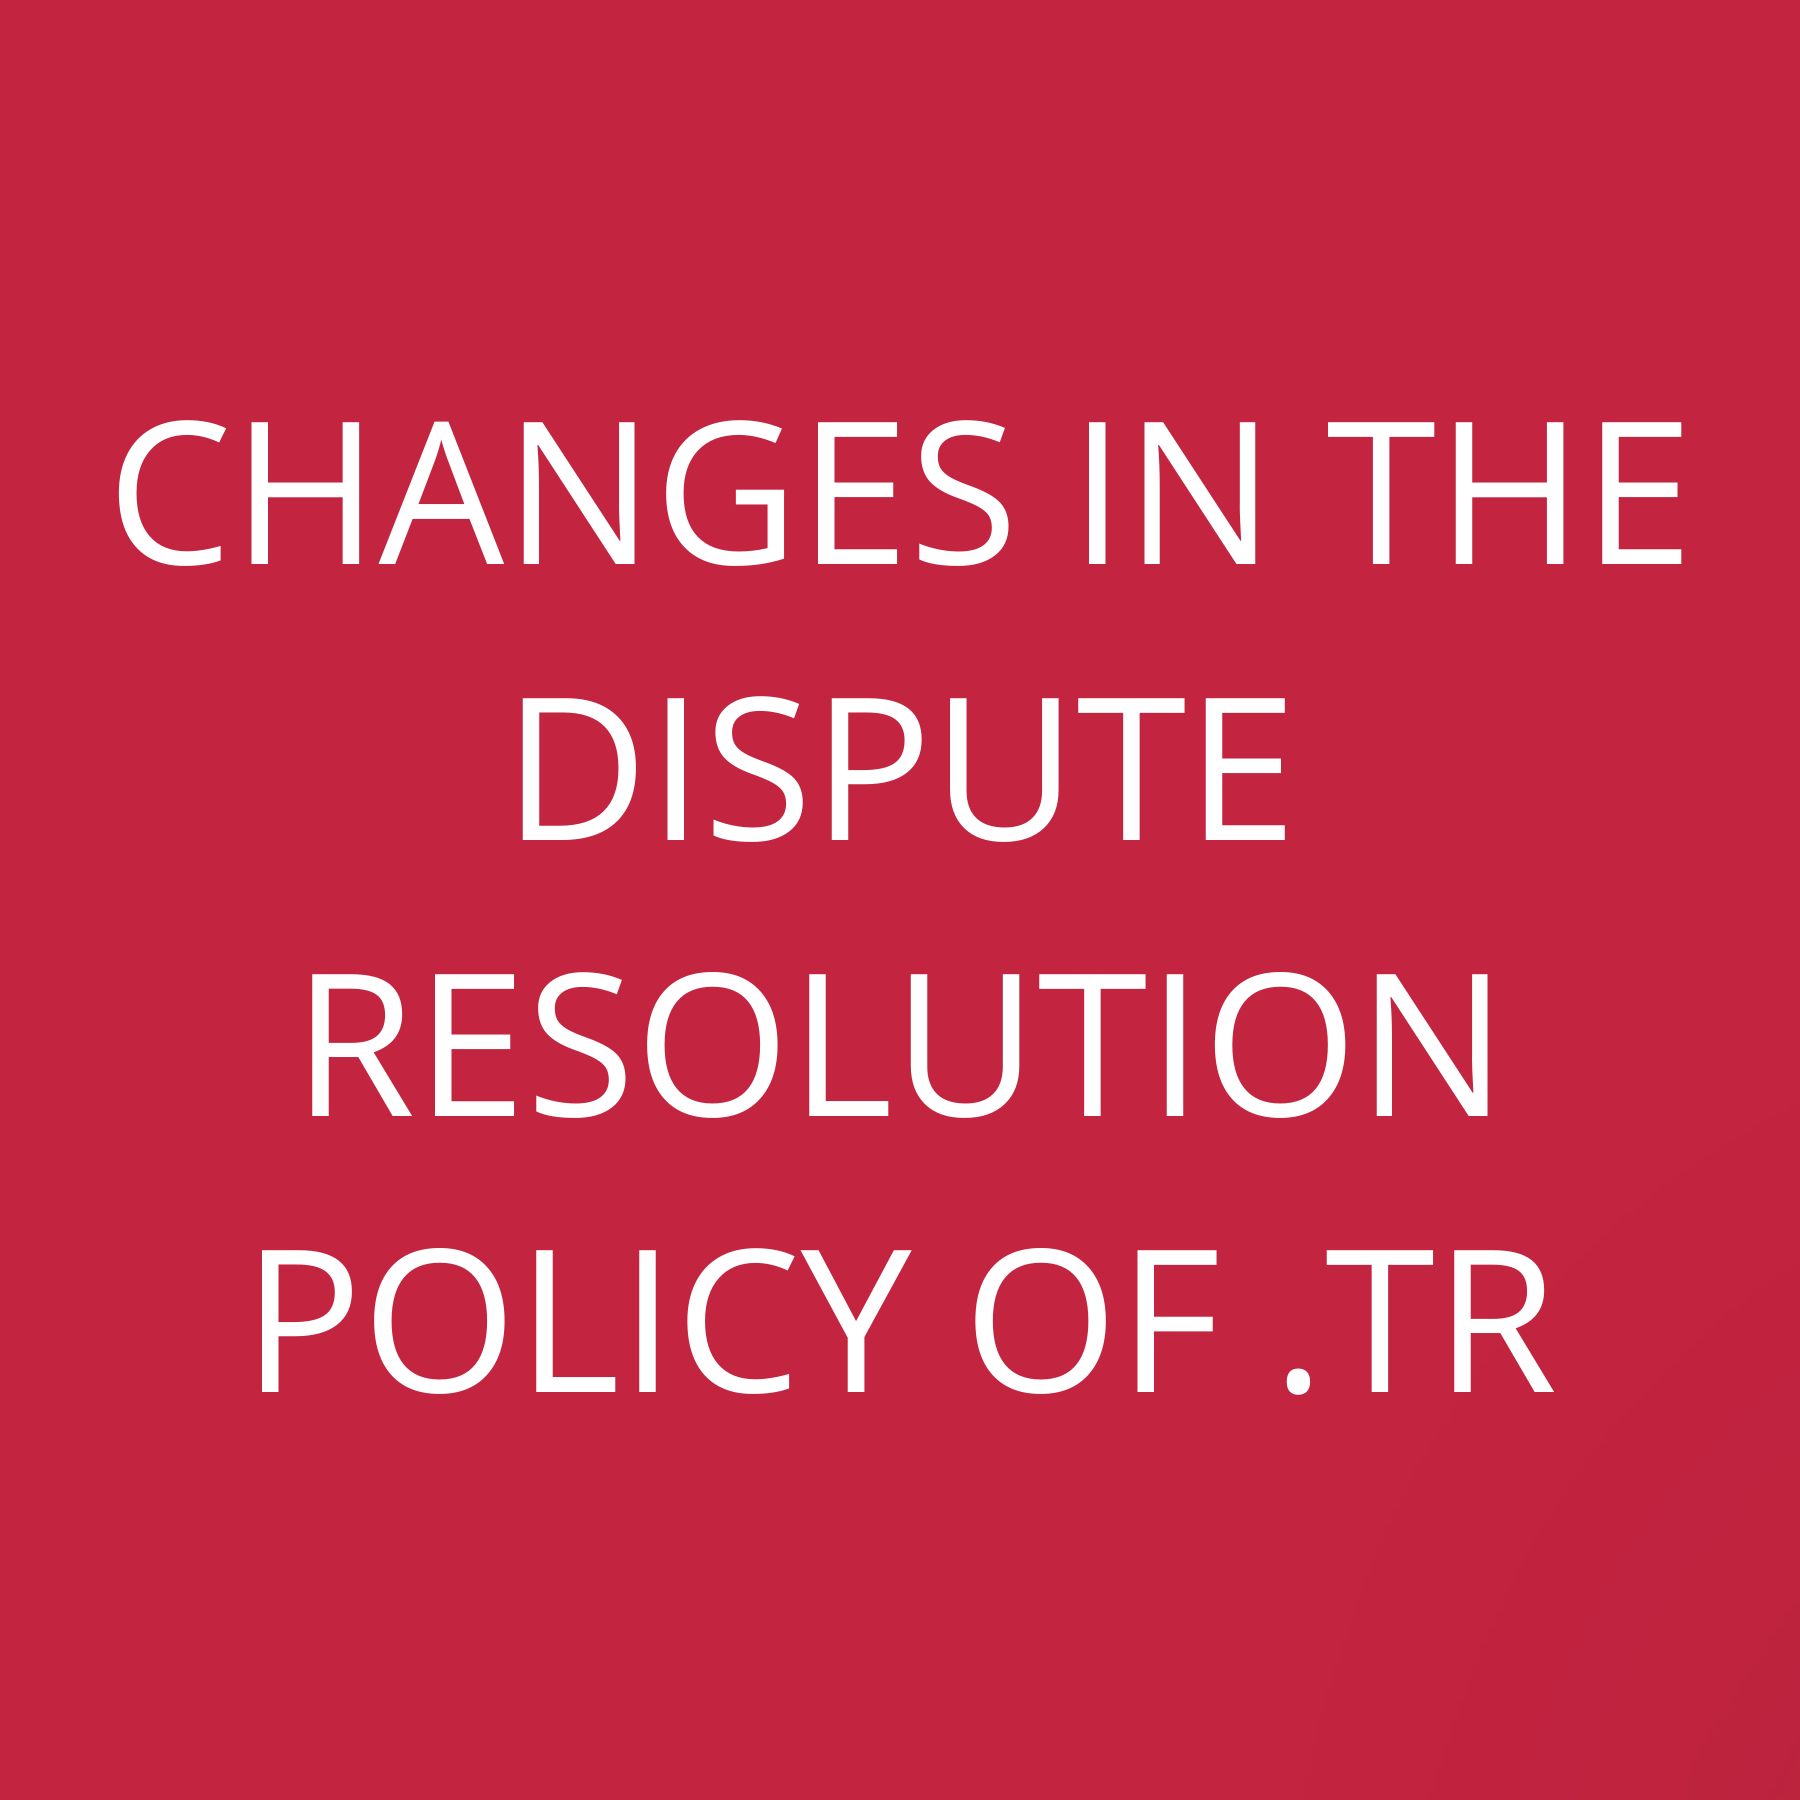 Changes in the Dispute Resolution Policy of .tr